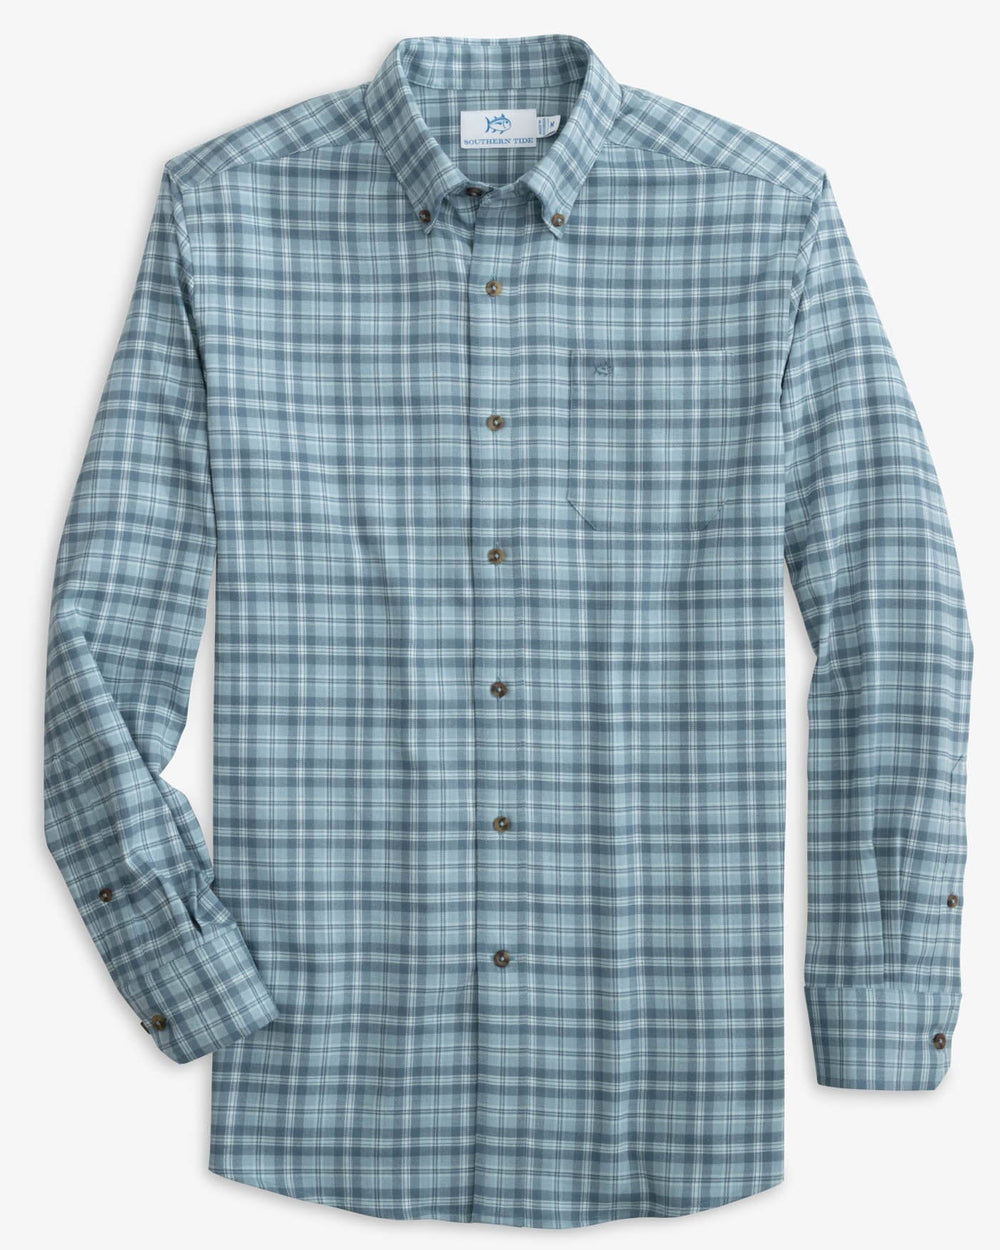 The front view of the Southern Tide Heather Lakewood Plaid Sport Shirt by Southern Tide - Heather Mountain Spring Blue